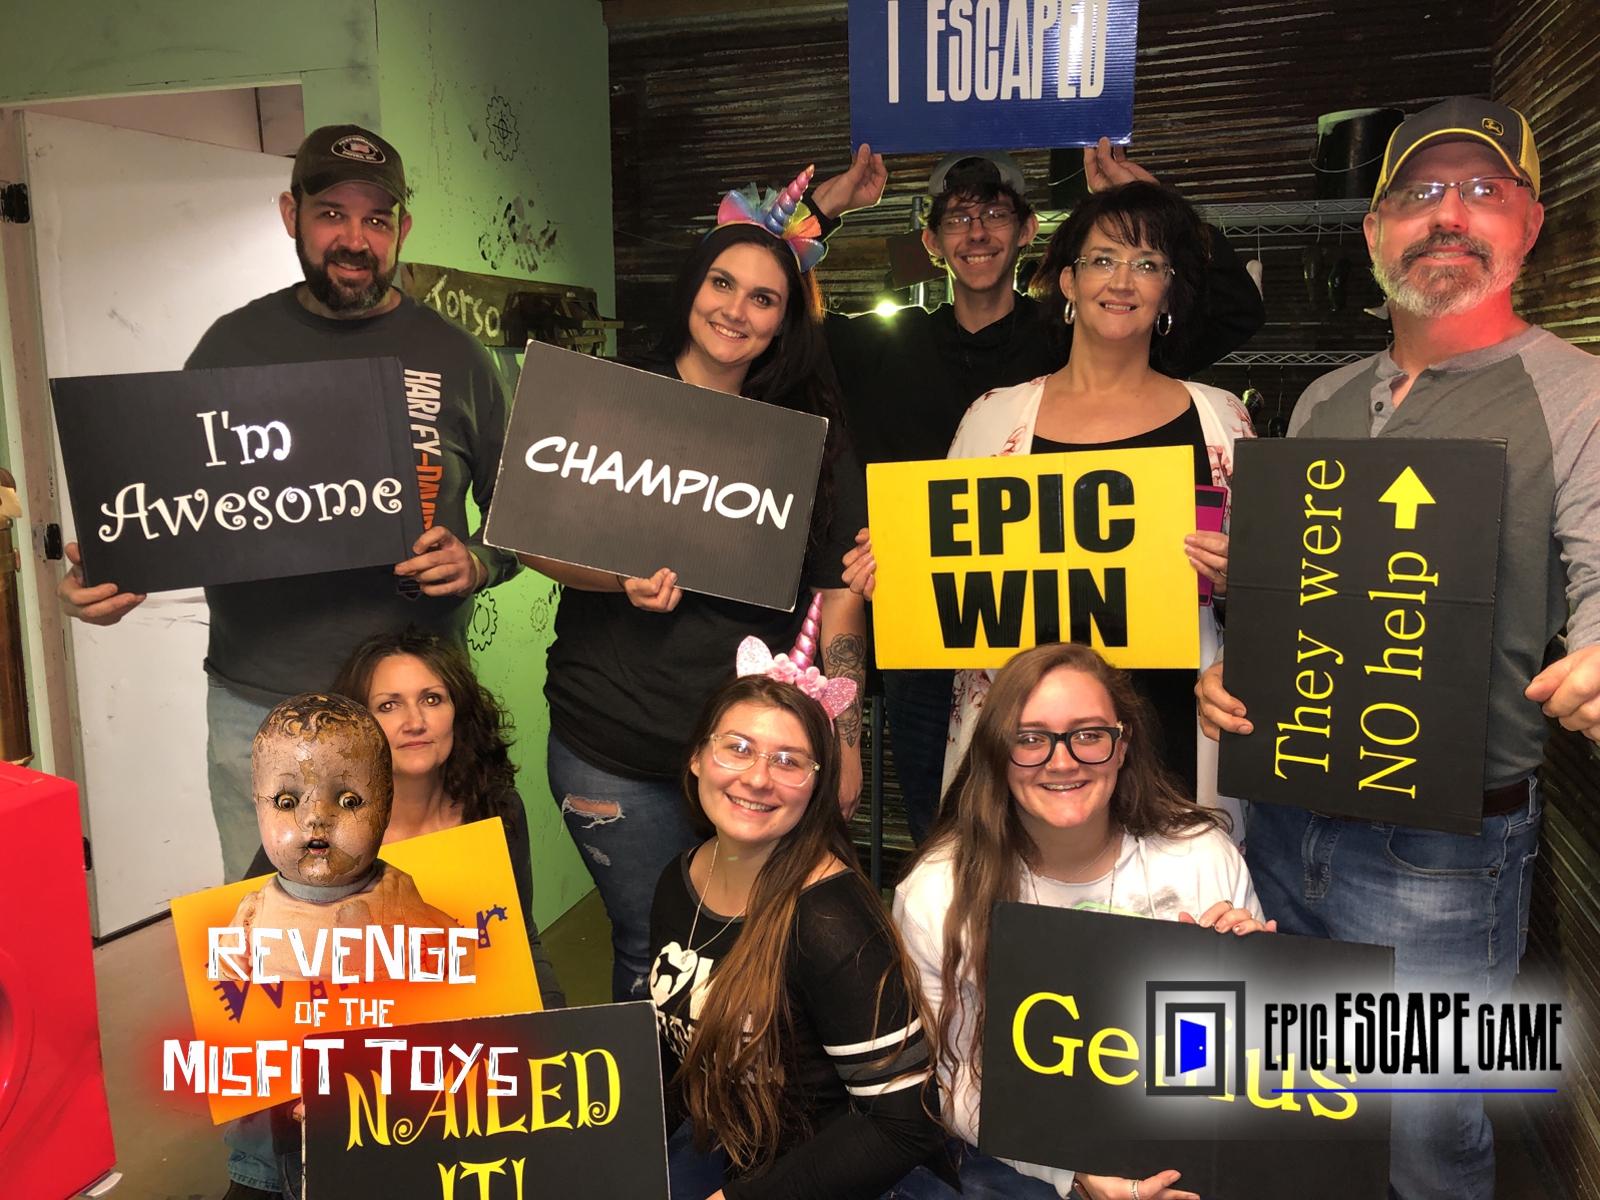 more brains to solve the escape room is a good idea